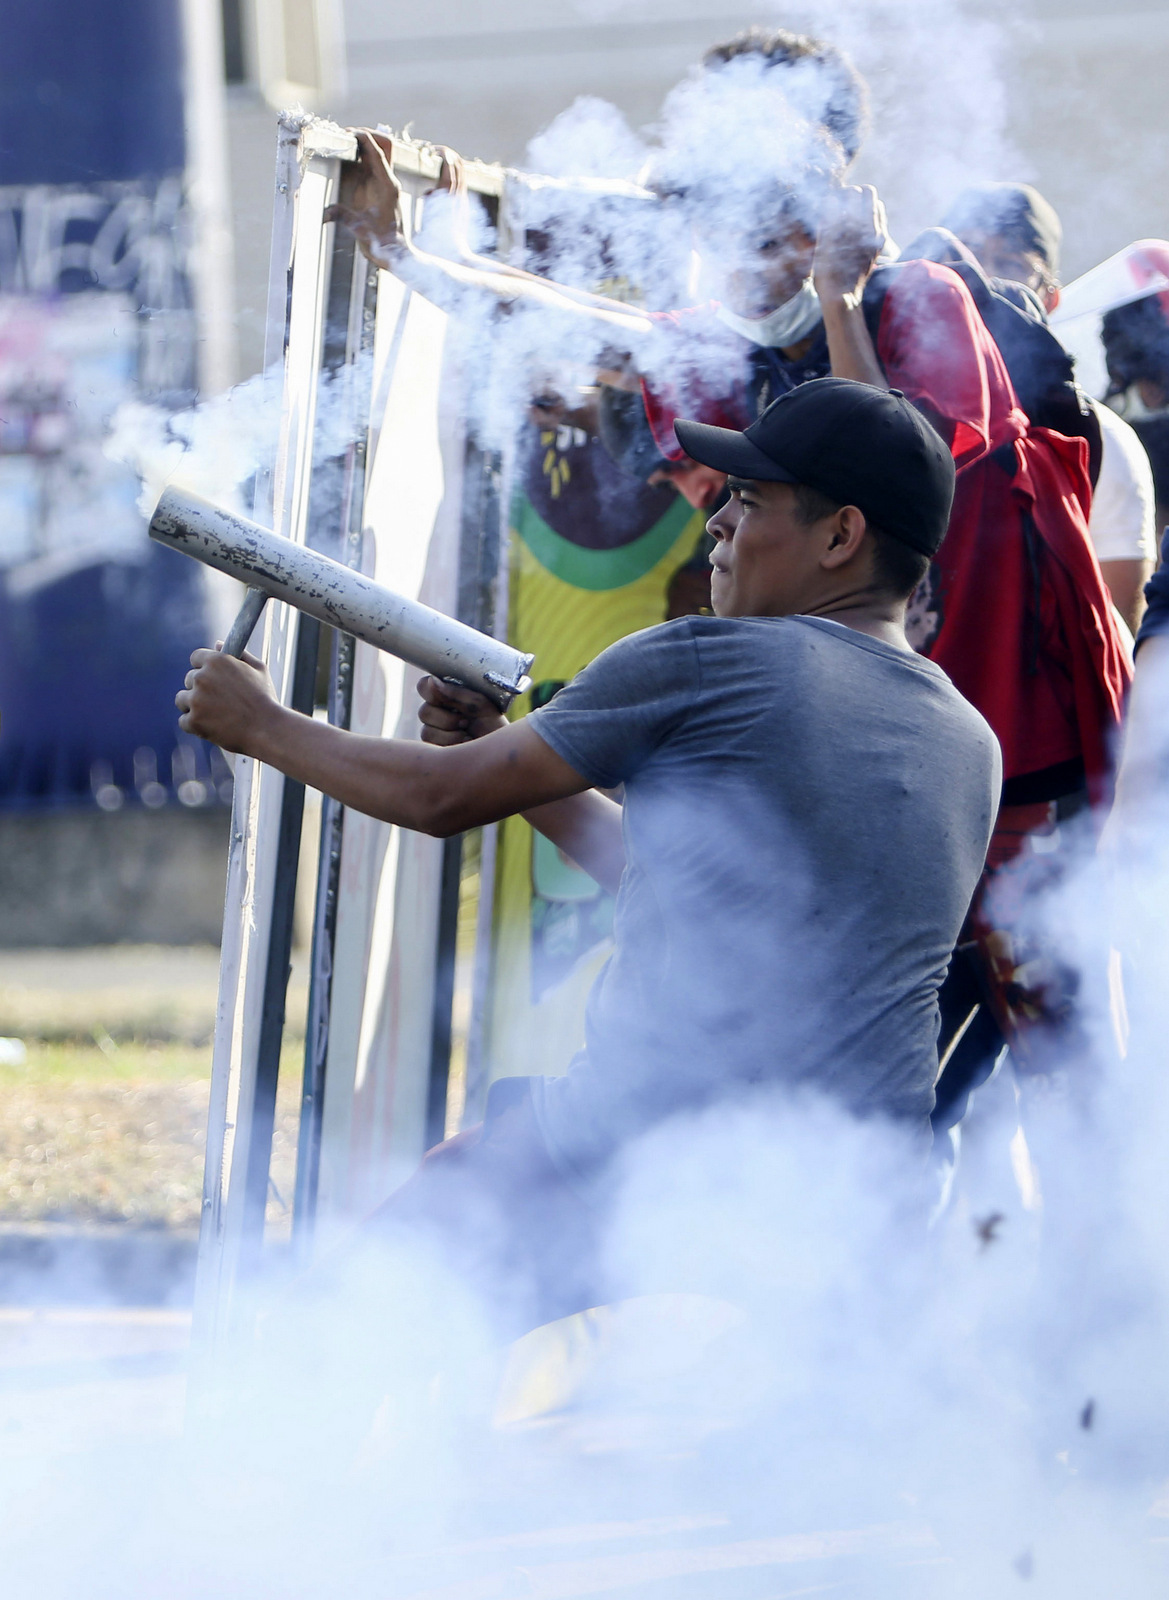 A protester fires from a homemade mortar at riot police during a third day of violent clashes in Managua, Nicaragua, April 20, 2018. The clashes, pitting protesters opposed to social security reforms against riot police and pro-government groups, have rocked the capital, and a half-dozen other cities over the last three days. The Organization of American States have expressed concern over the heavy-handed crackdown, while also calling on demonstrators to protest peacefully. (AP/Alfredo Zuniga)